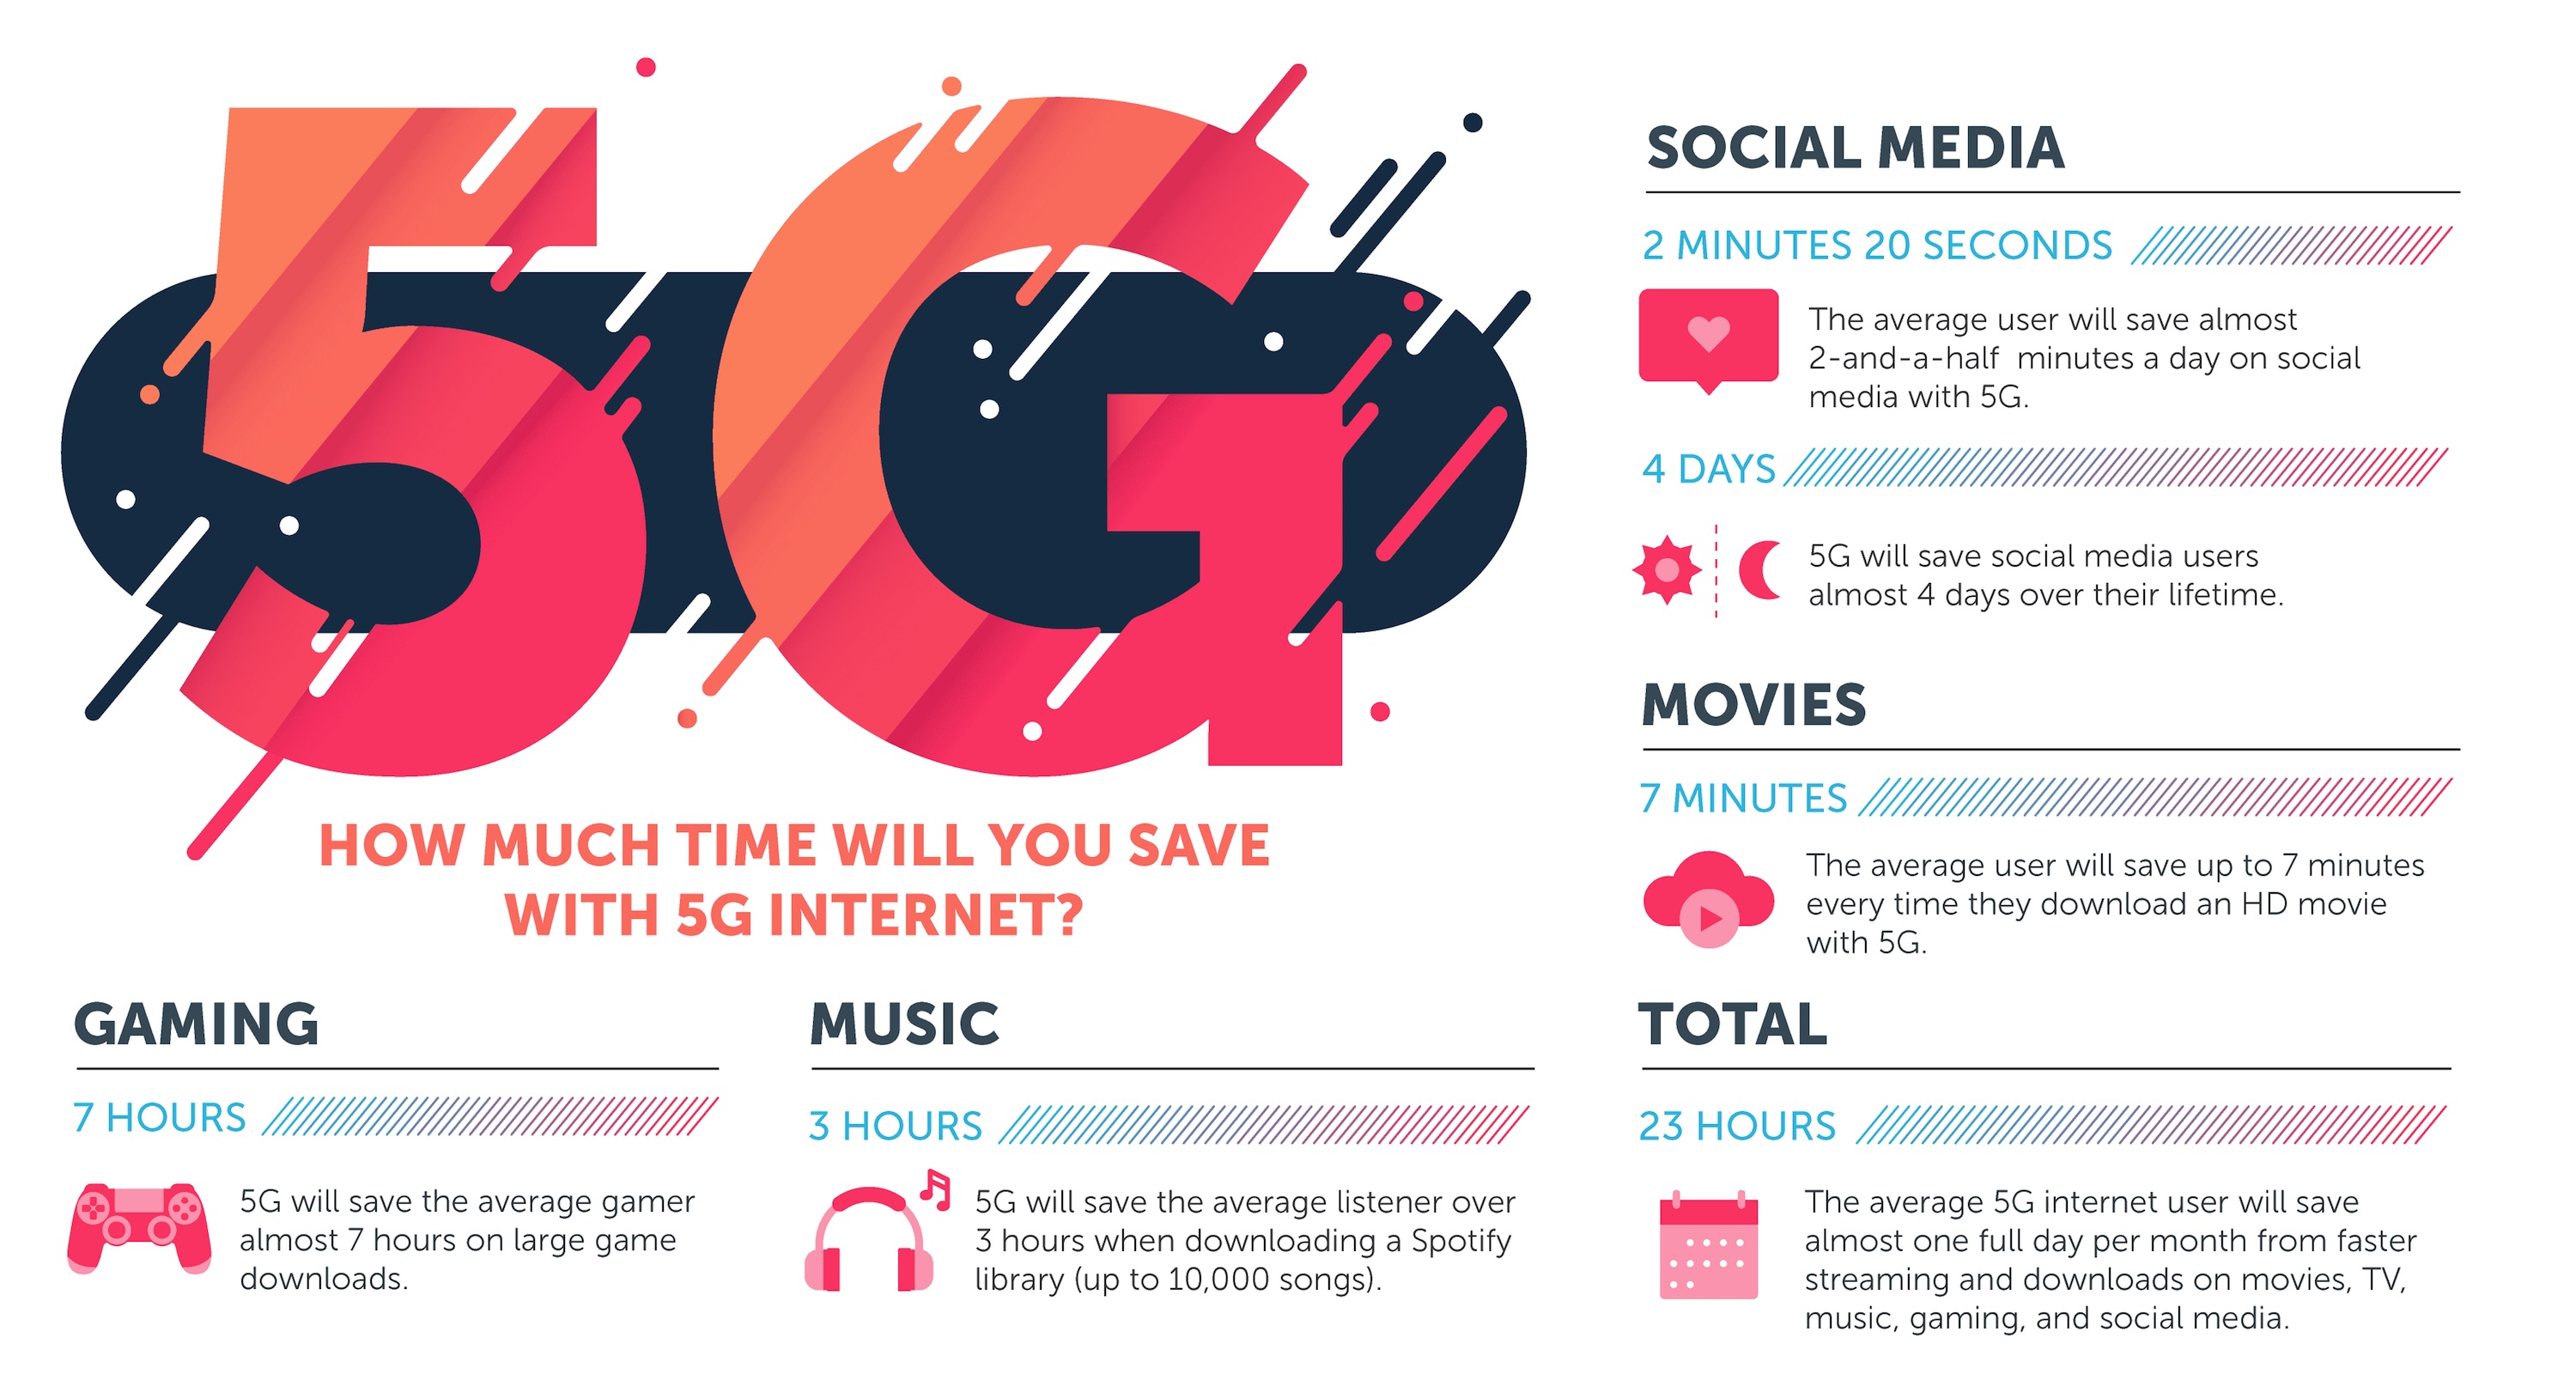 How Much Time Will You Save With 5G Internet?